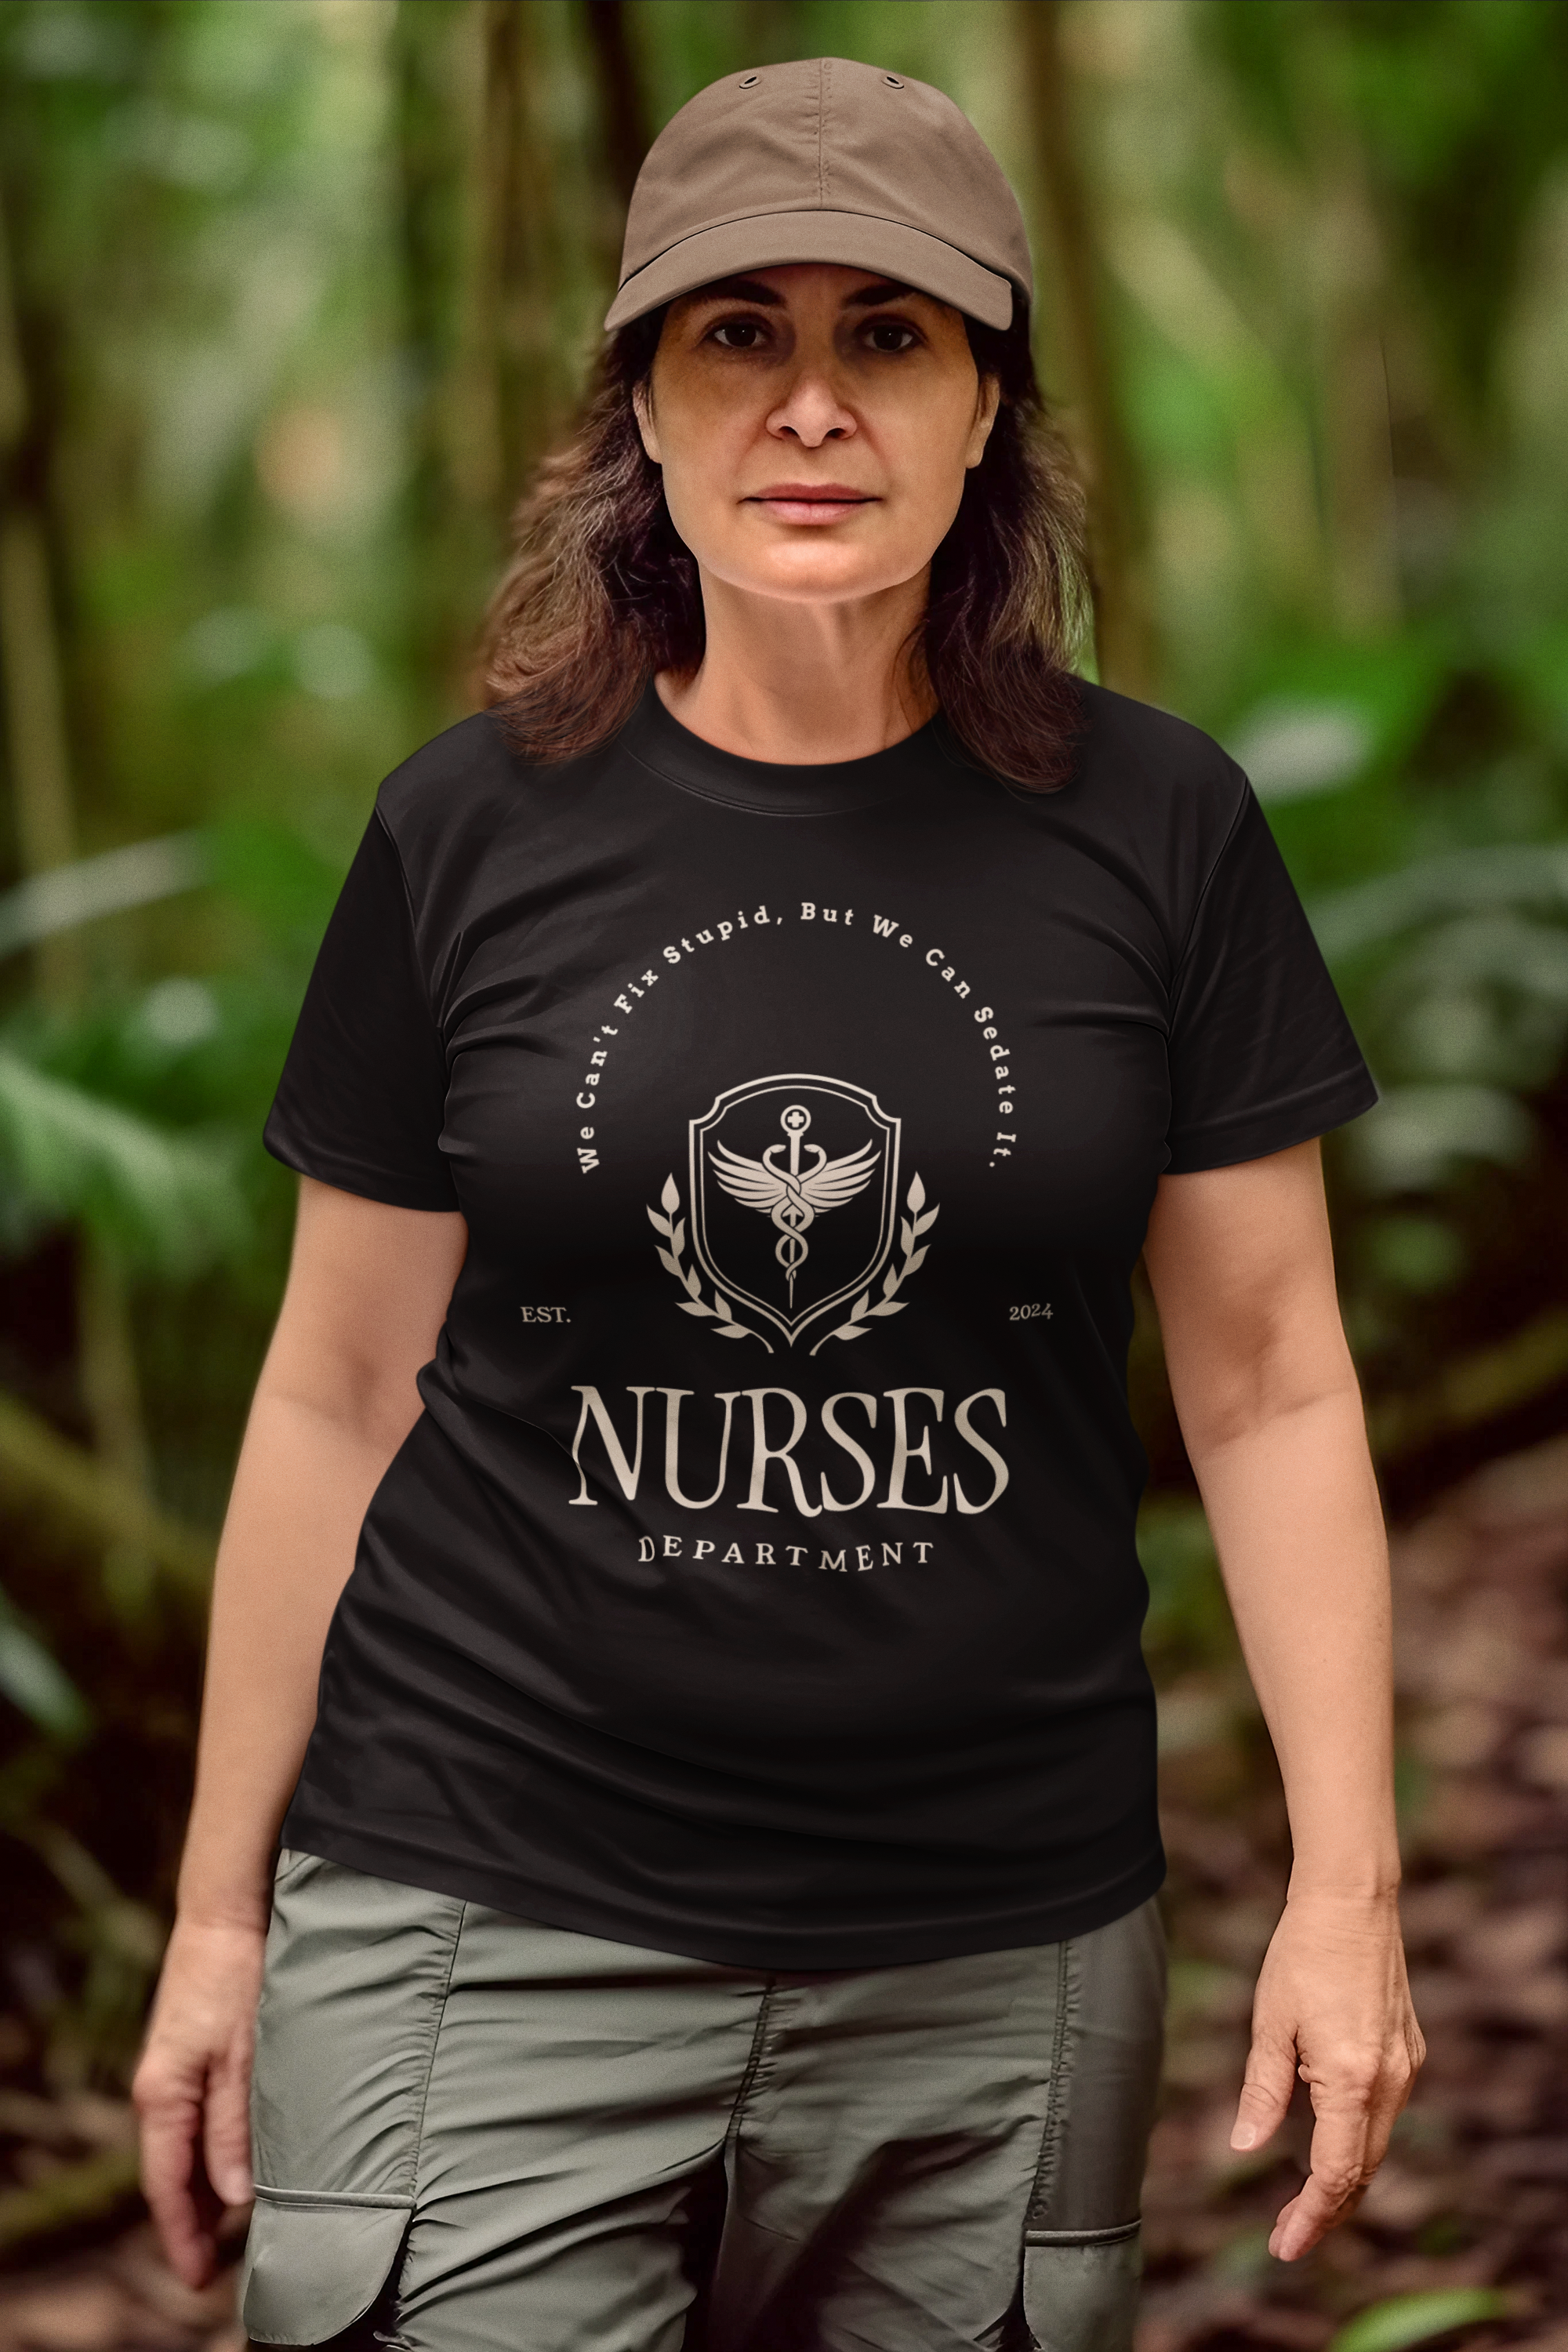 The image features a high-quality, soft, unisex jersey tee in a classic cut. The front proudly displays the humorous "We Can't Fix Stupid, But We Can Sedate It" slogan, with a customizable "Est. Date" below that adds a personal touch to the shirt. It's the perfect combination of comfort and sass that any nurse would be proud to wear on their day off or under their scrubs.